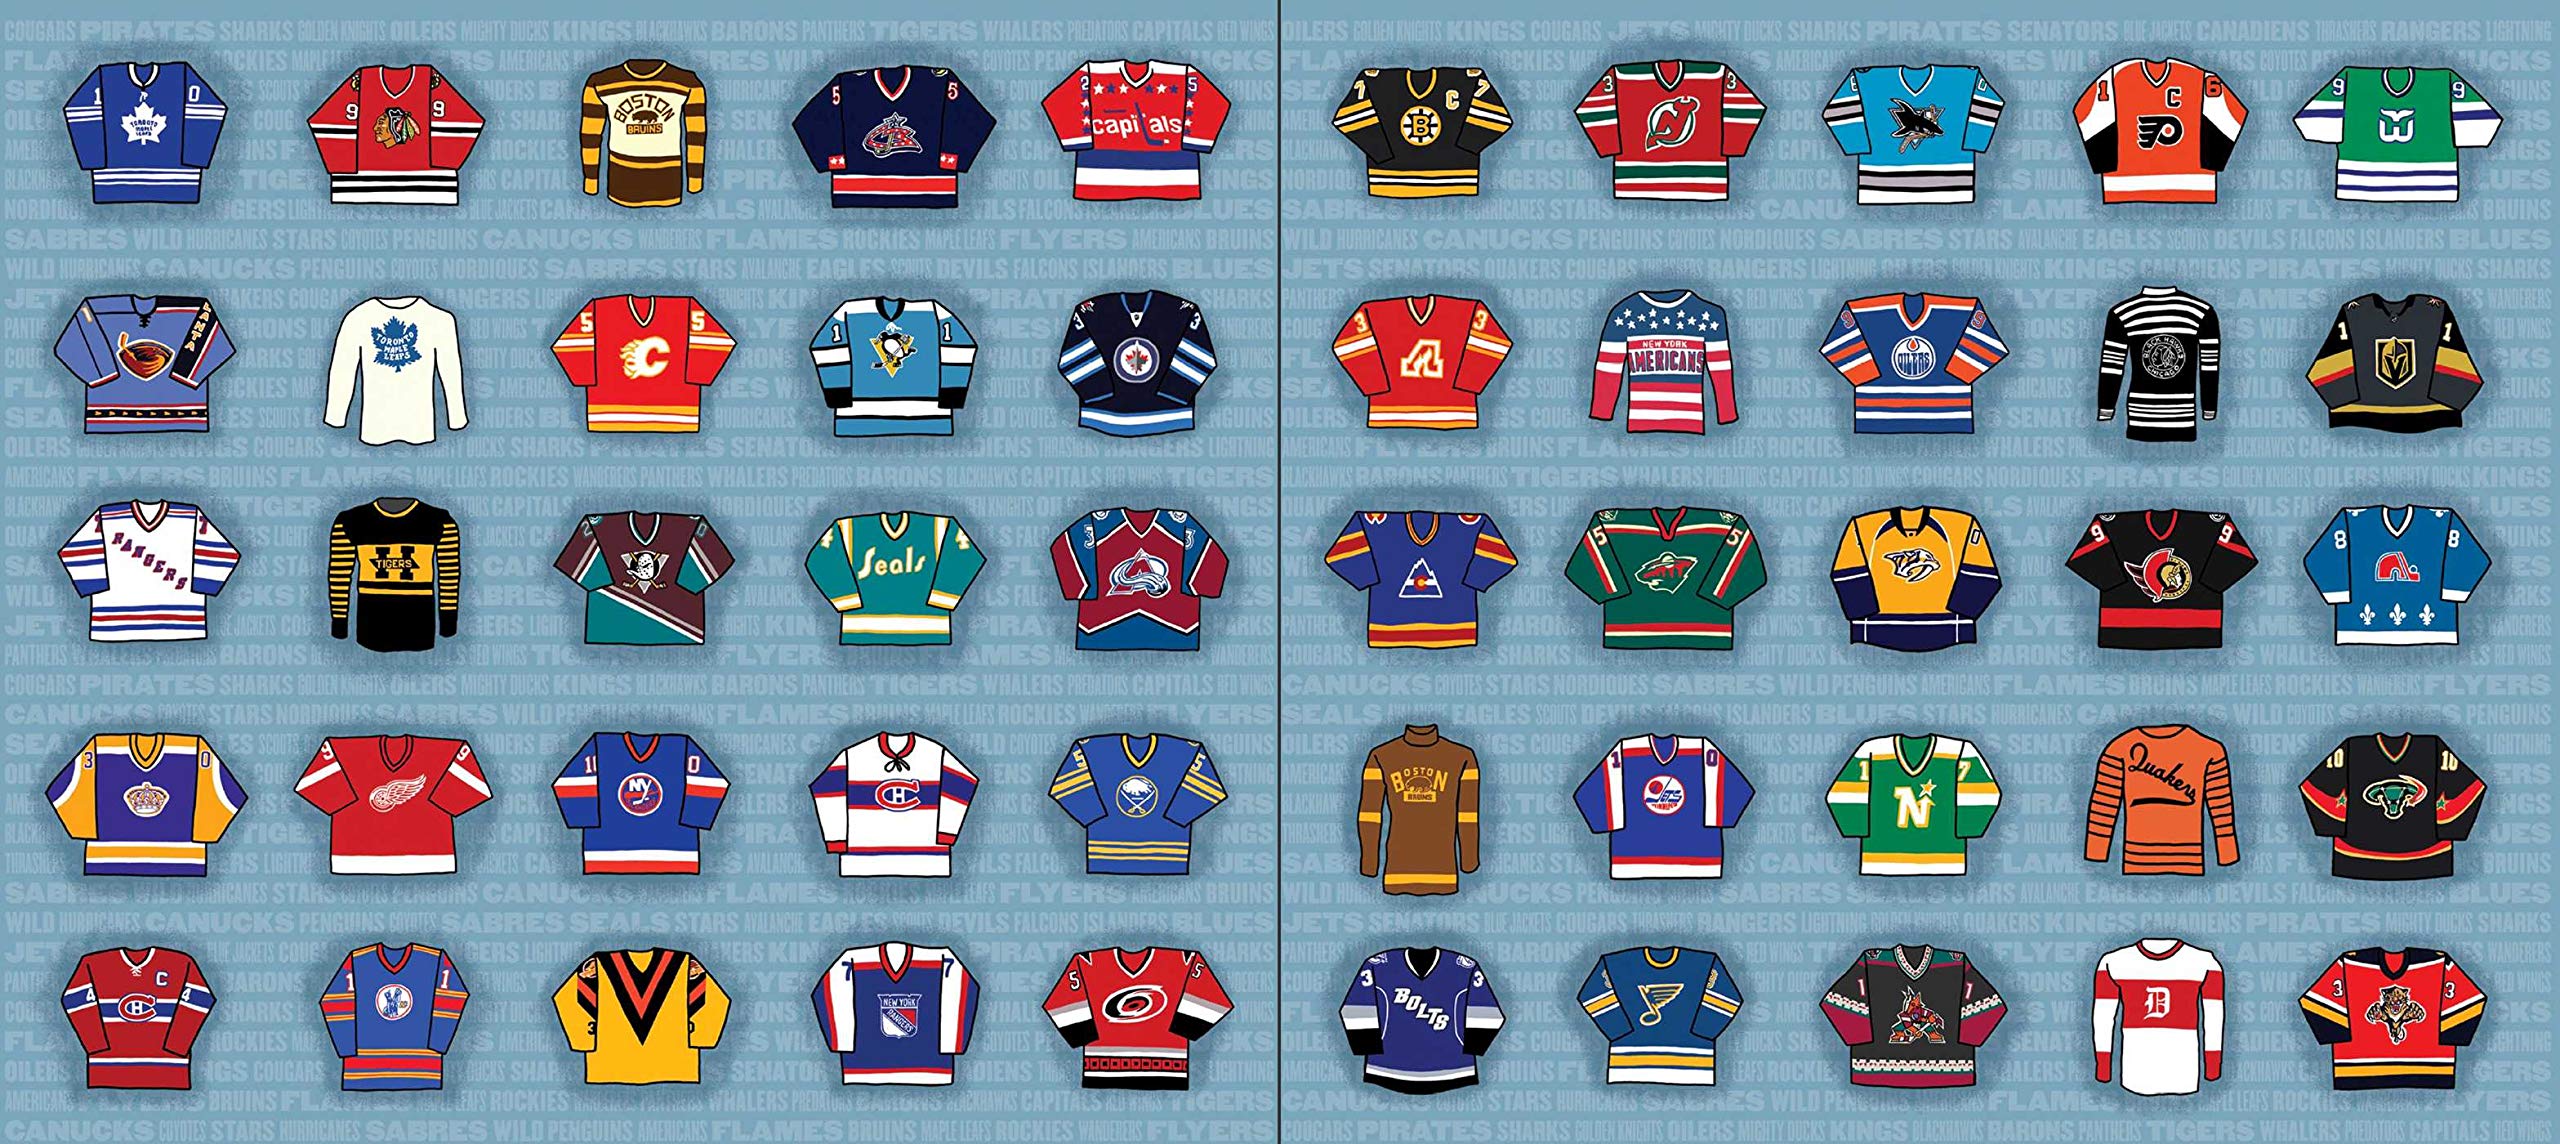 Fabric of the Game: The Stories Behind the NHL's Names, Logos, and Uniforms